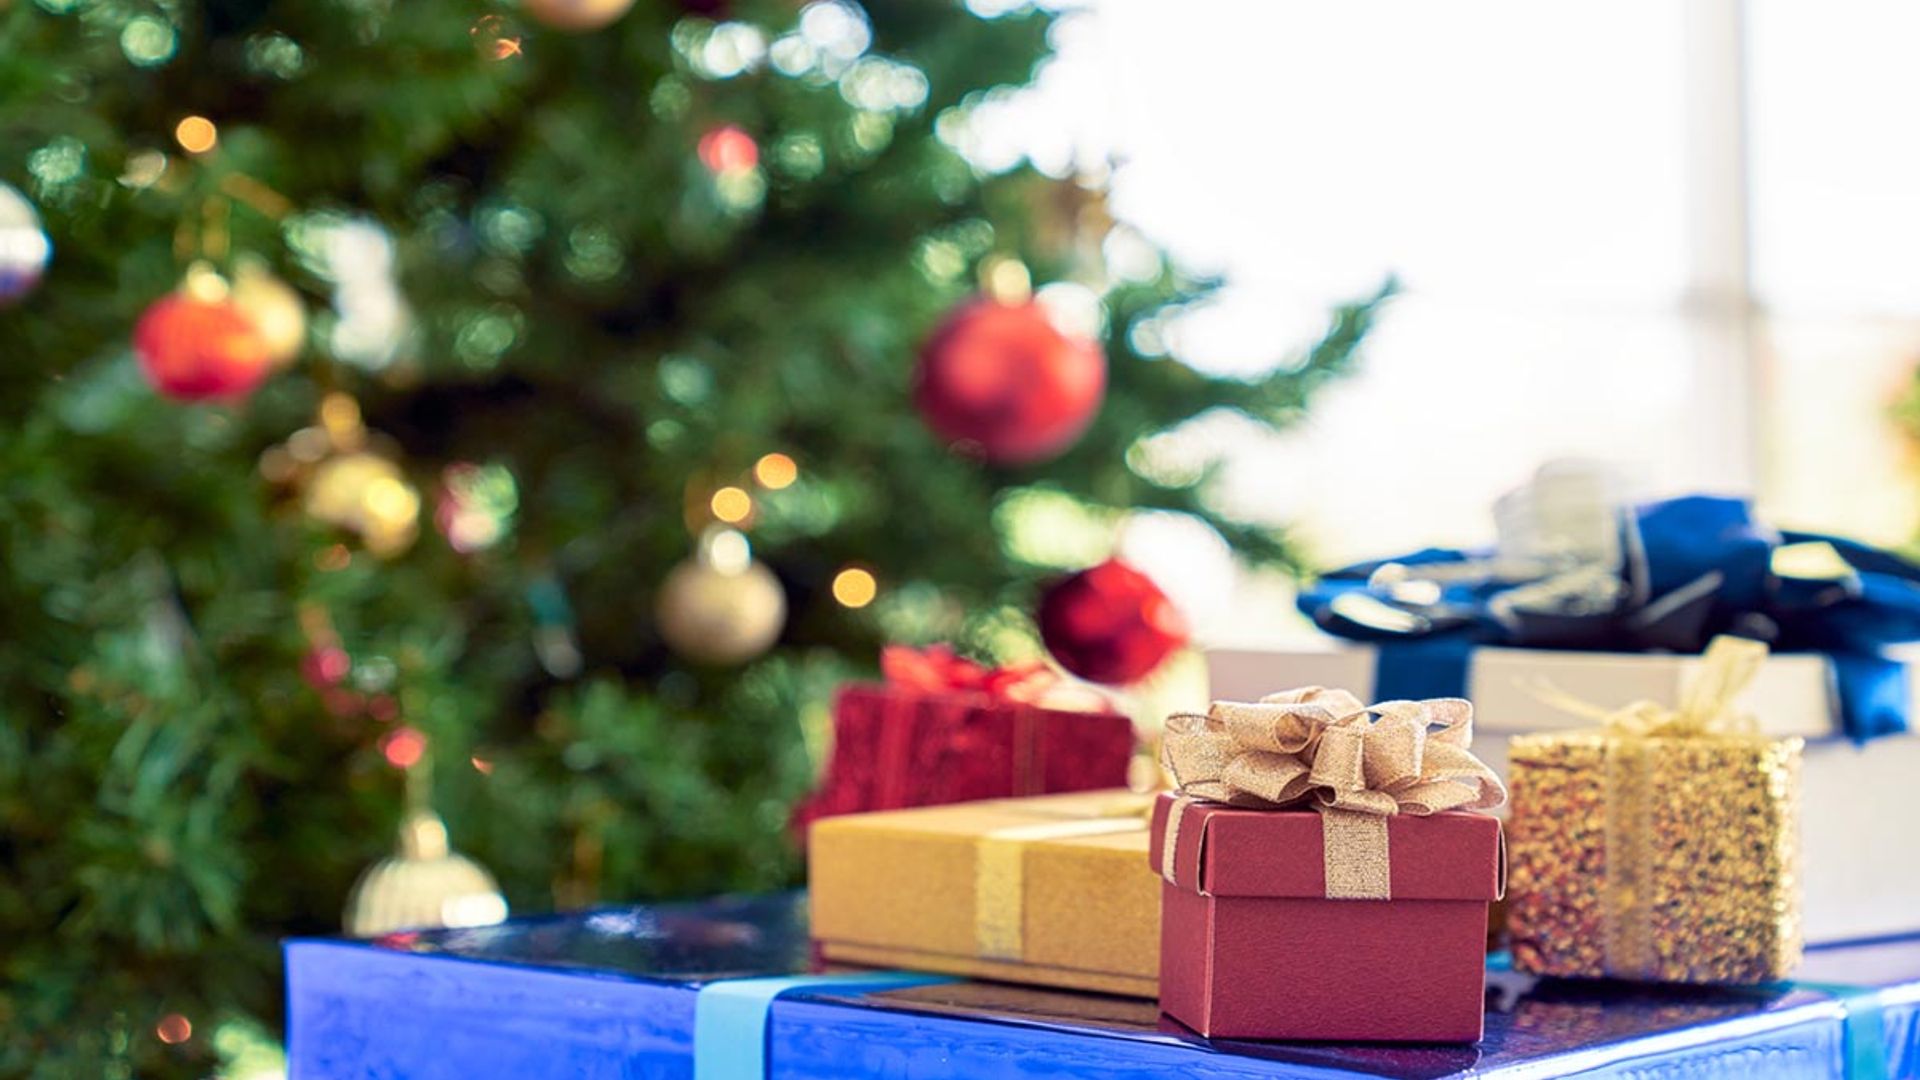 Christmas shopping: Find local gifts for everyone on your list